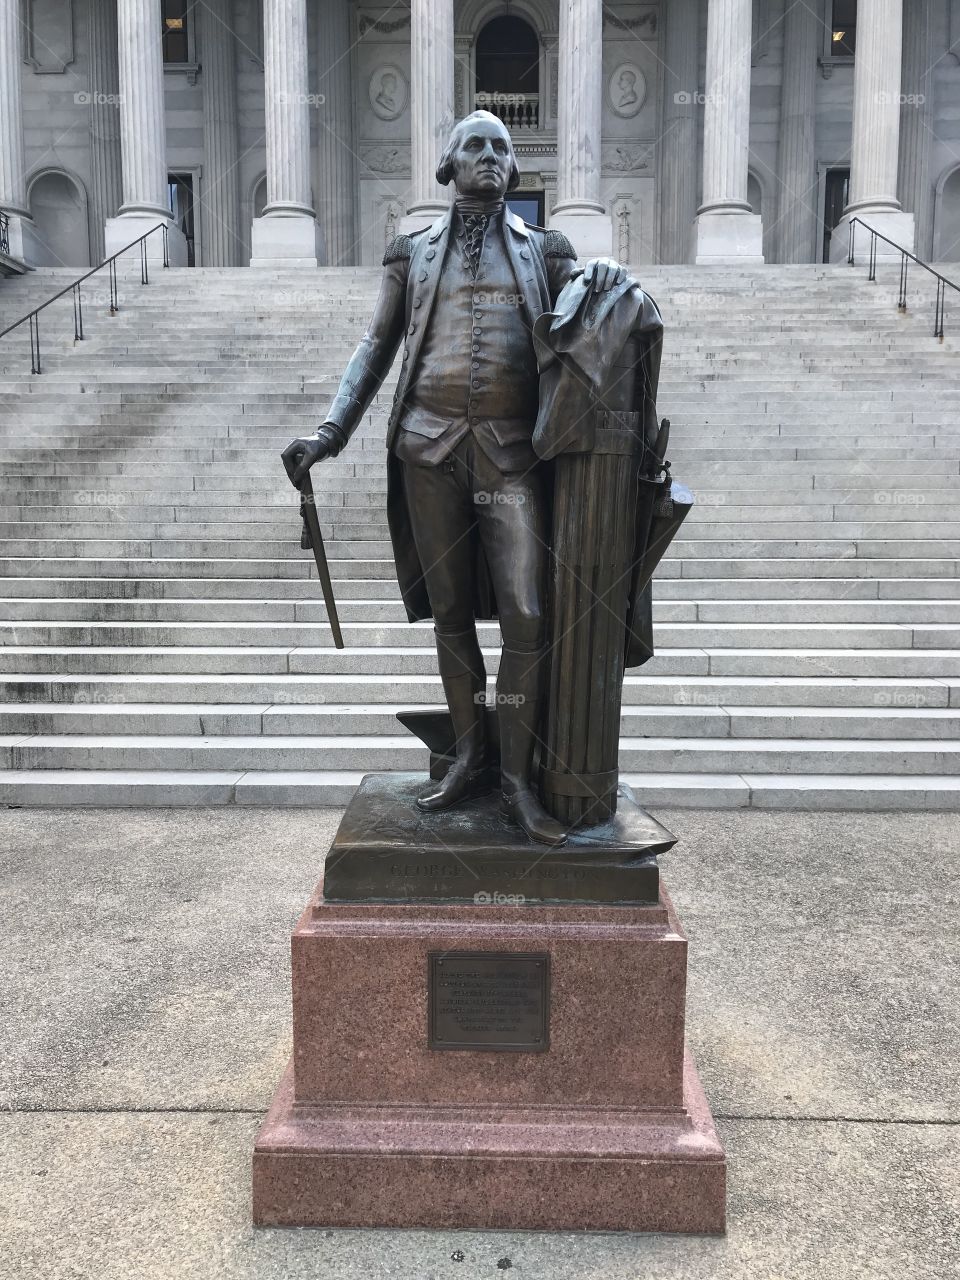 The George Washing’s statue in front if the SC Statehouse with his actual partial preserved cane.